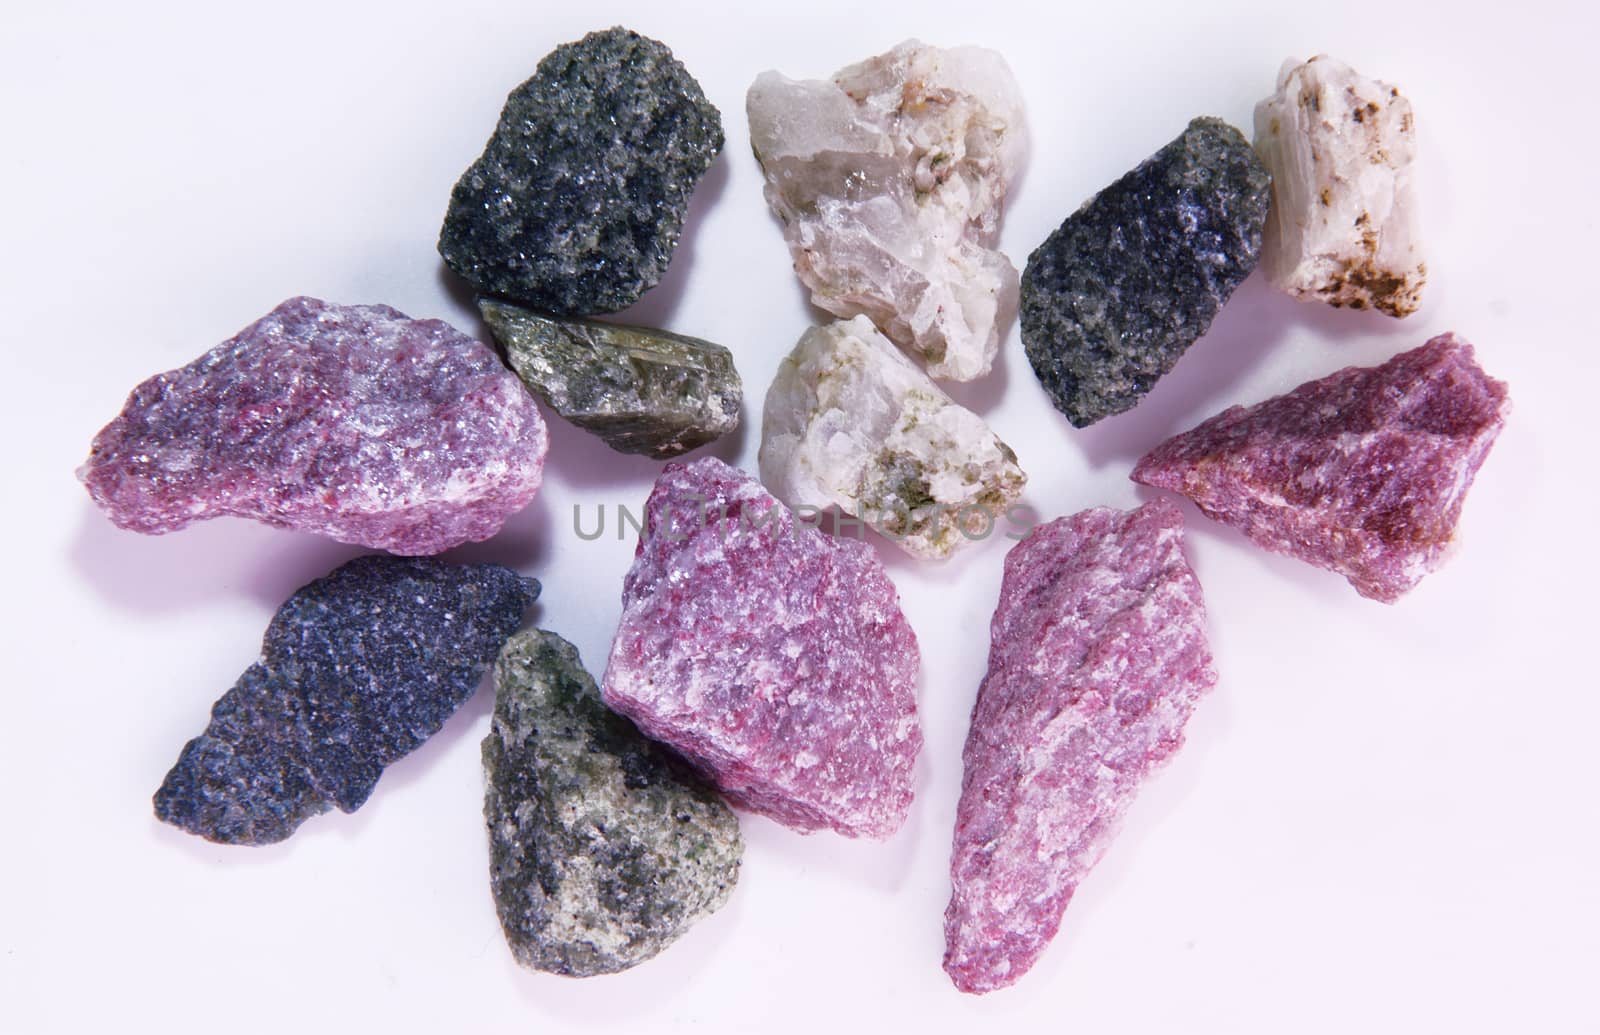 CRYSTALS AND MINERAL SAMPLES PHOTOGRAPHED IN MACRO